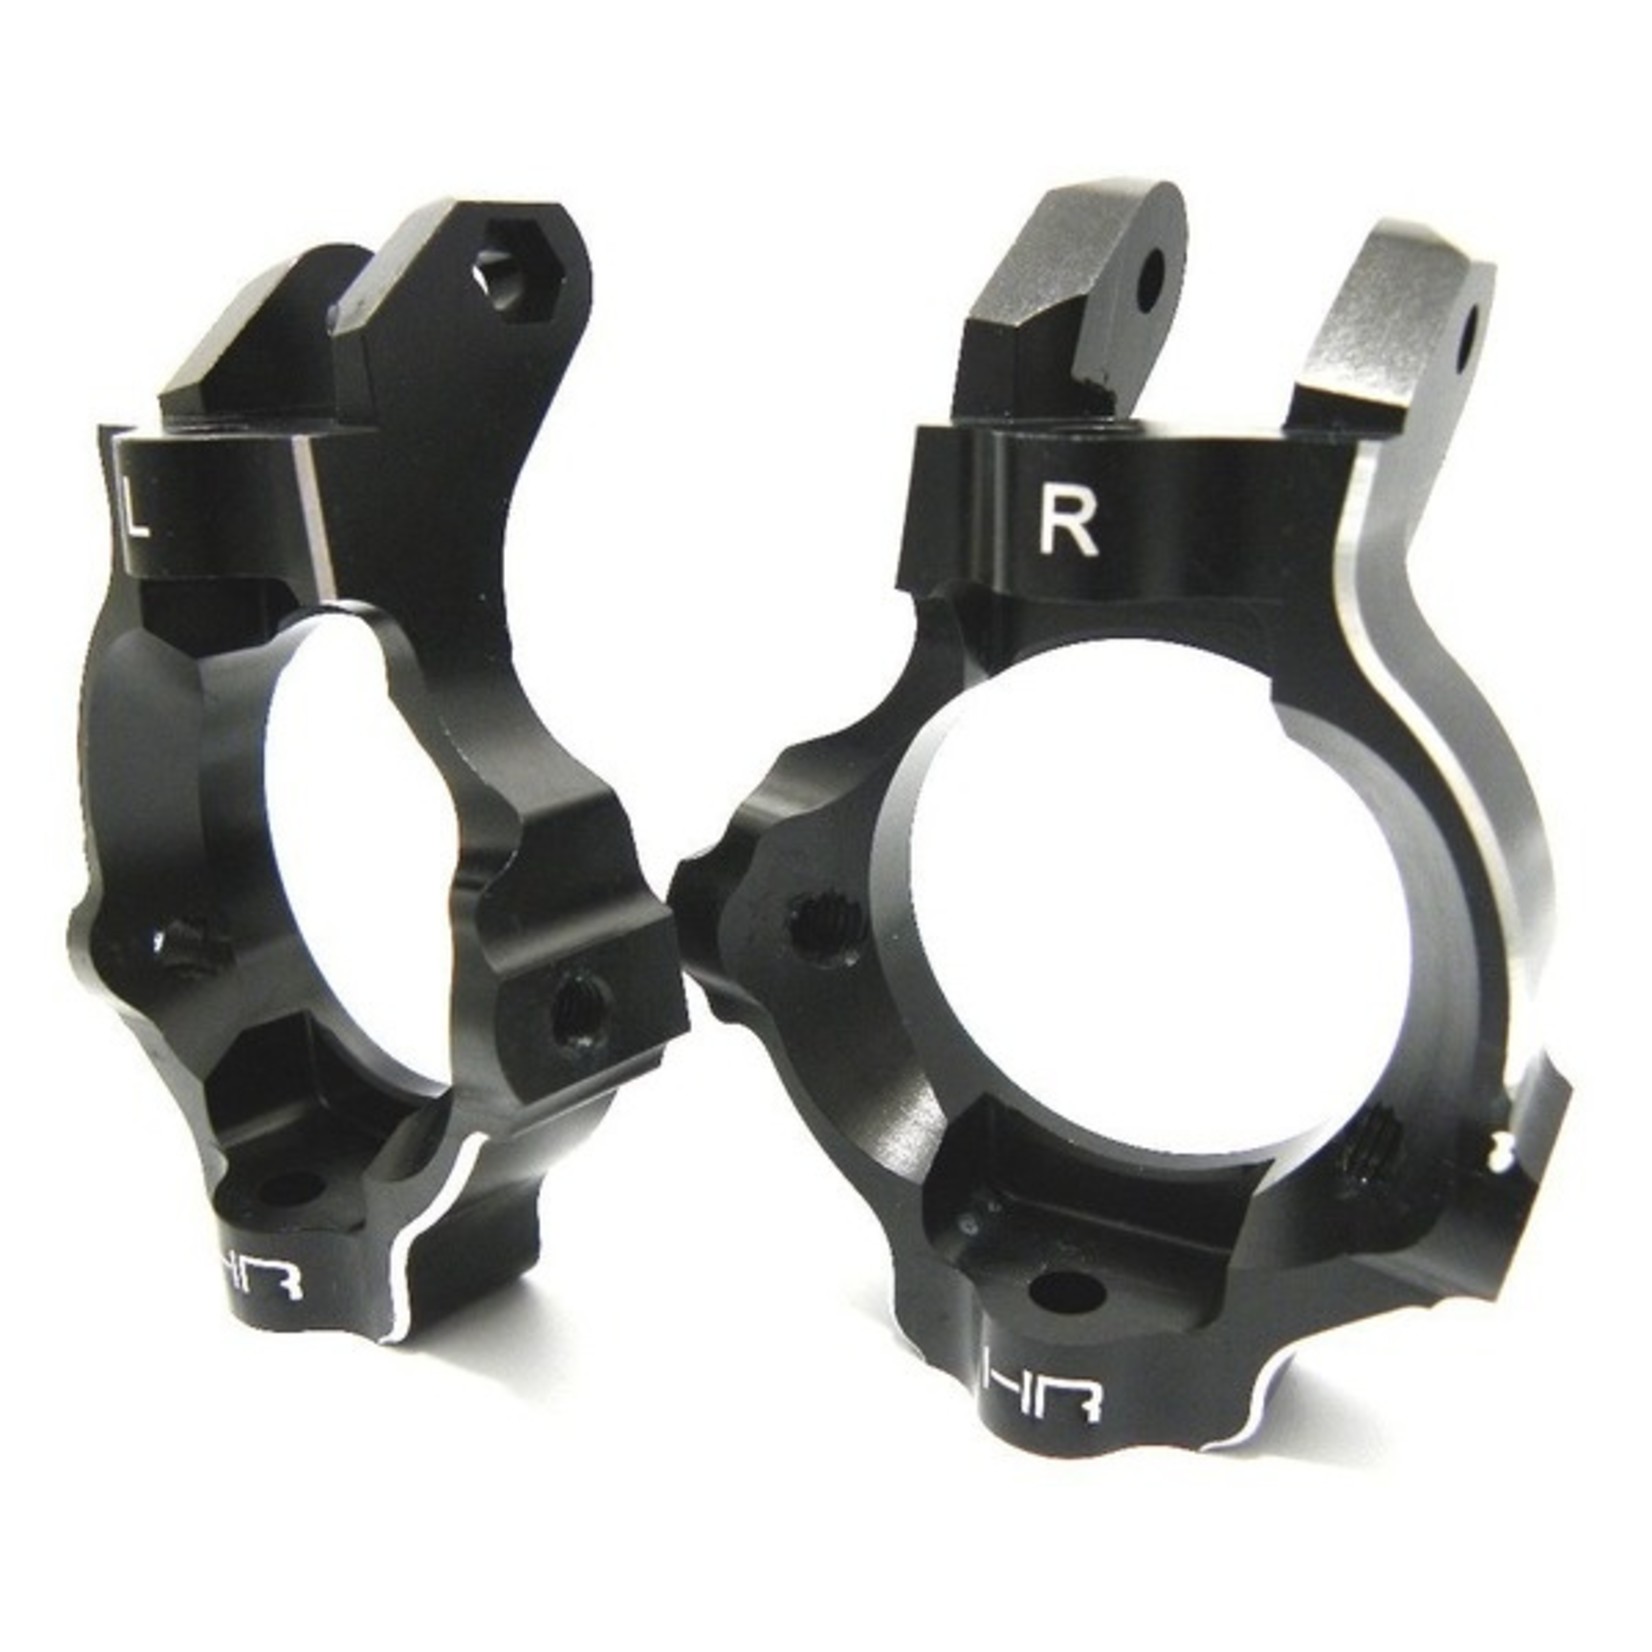 Hot Racing Alum Spindle Carrier Caster Block Set, for Losi 5ive-T & M